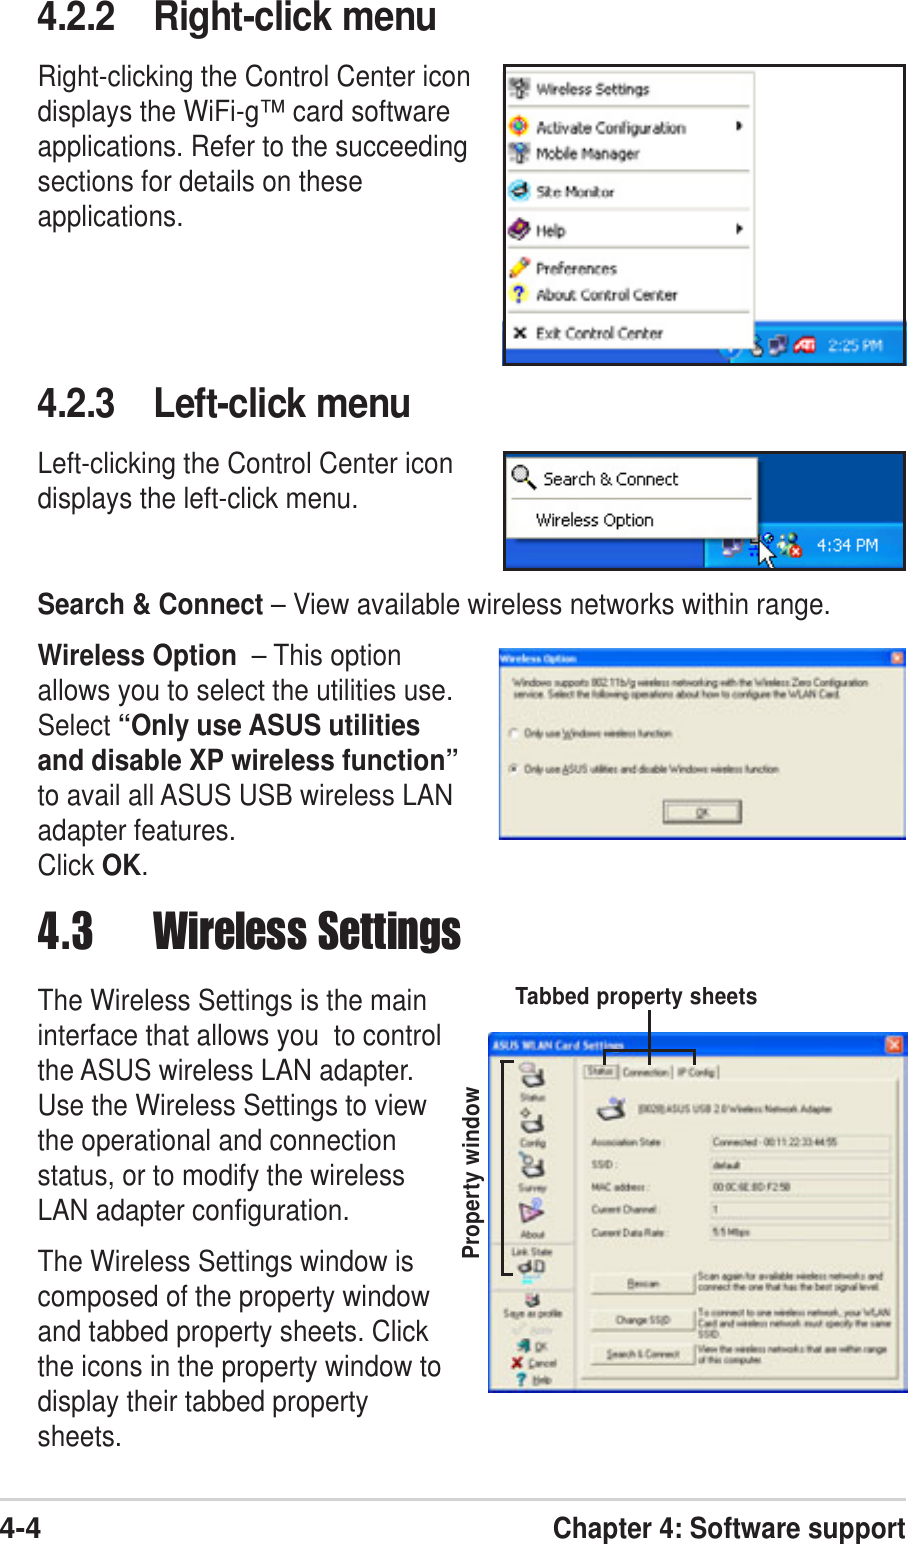 4-4Chapter 4: Software support4.3 Wireless SettingsThe Wireless Settings is the maininterface that allows you  to controlthe ASUS wireless LAN adapter.Use the Wireless Settings to viewthe operational and connectionstatus, or to modify the wirelessLAN adapter configuration.The Wireless Settings window iscomposed of the property windowand tabbed property sheets. Clickthe icons in the property window todisplay their tabbed propertysheets.Property windowTabbed property sheets4.2.2 Right-click menuRight-clicking the Control Center icondisplays the WiFi-g™ card softwareapplications. Refer to the succeedingsections for details on theseapplications.4.2.3 Left-click menuLeft-clicking the Control Center icondisplays the left-click menu.Search &amp; Connect – View available wireless networks within range.Wireless Option  – This optionallows you to select the utilities use.Select “Only use ASUS utilitiesand disable XP wireless function”to avail all ASUS USB wireless LANadapter features.Click OK.